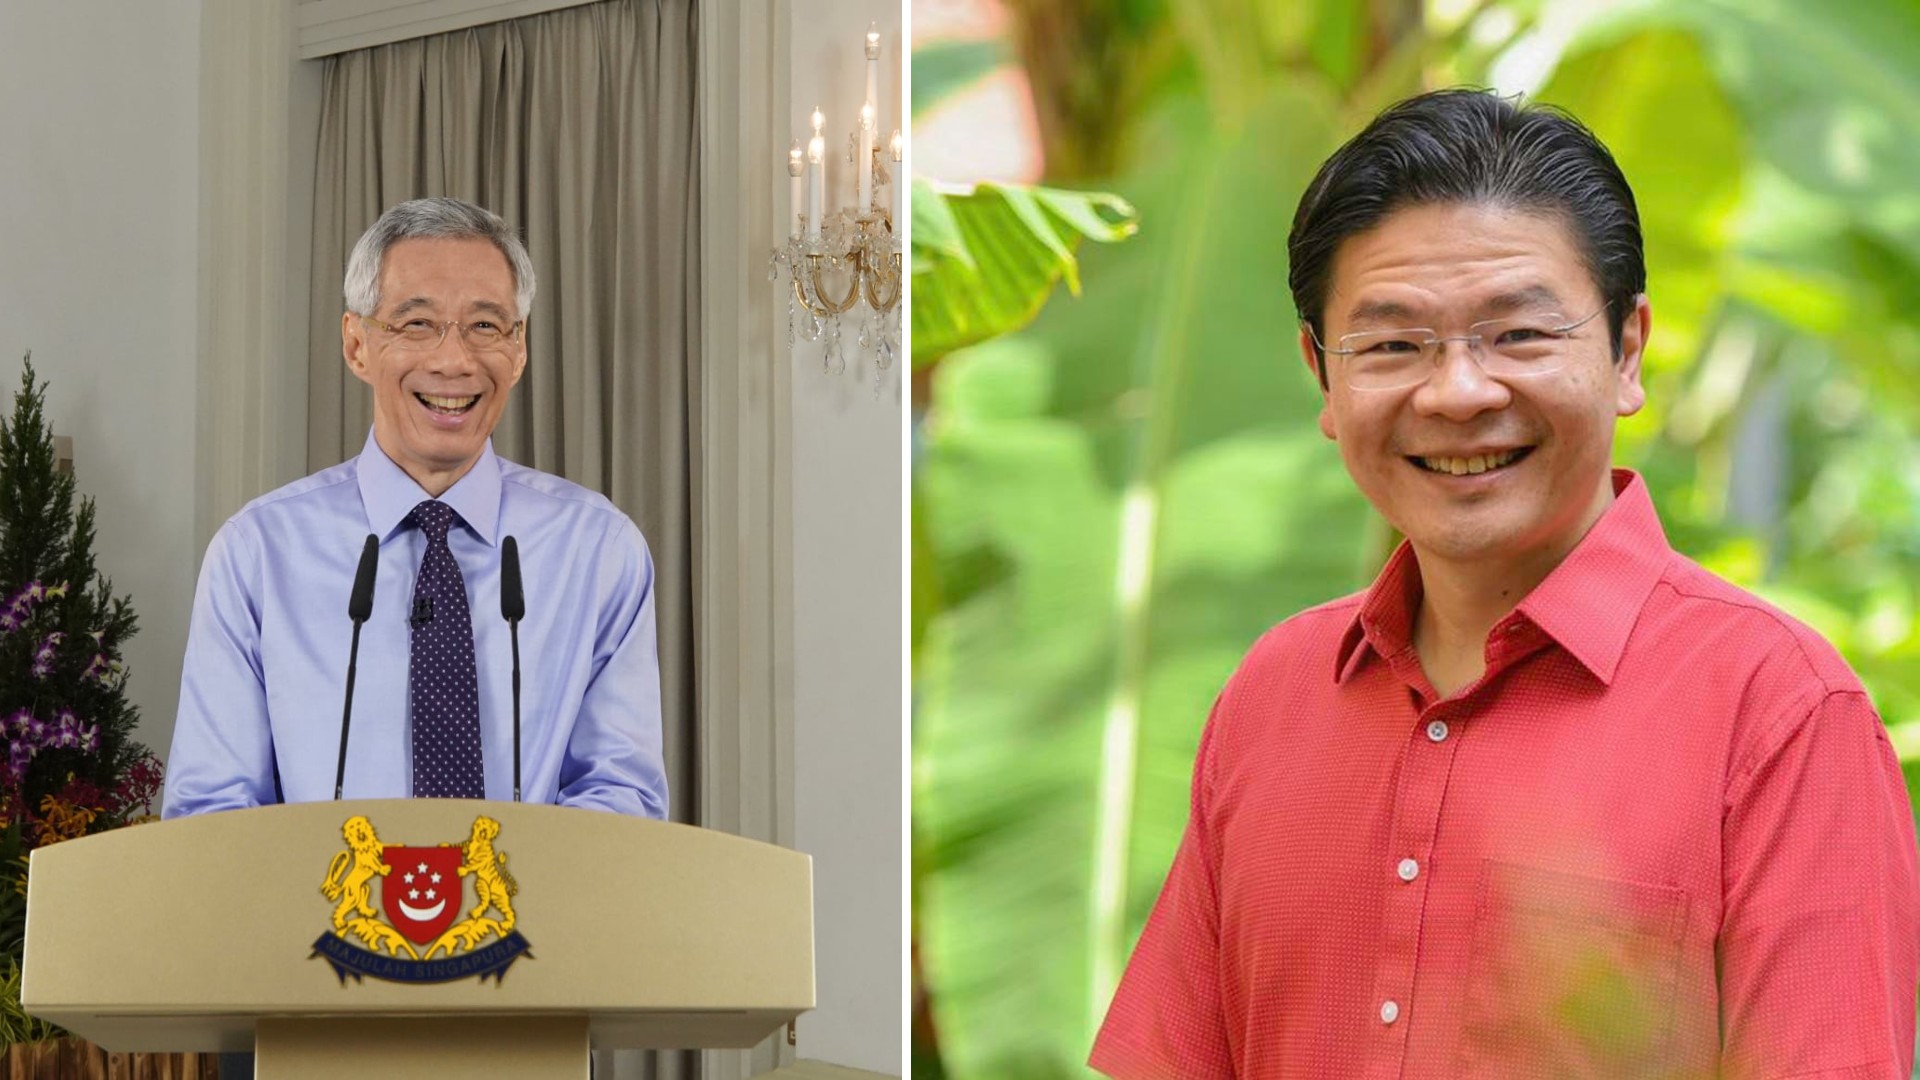 Prime Minister Lee Hsien Loong and in-coming Finance Minister Lawrence Wong. Photos: Lee Hsien Loong/Facebook, Lawrence Wong/Facebook